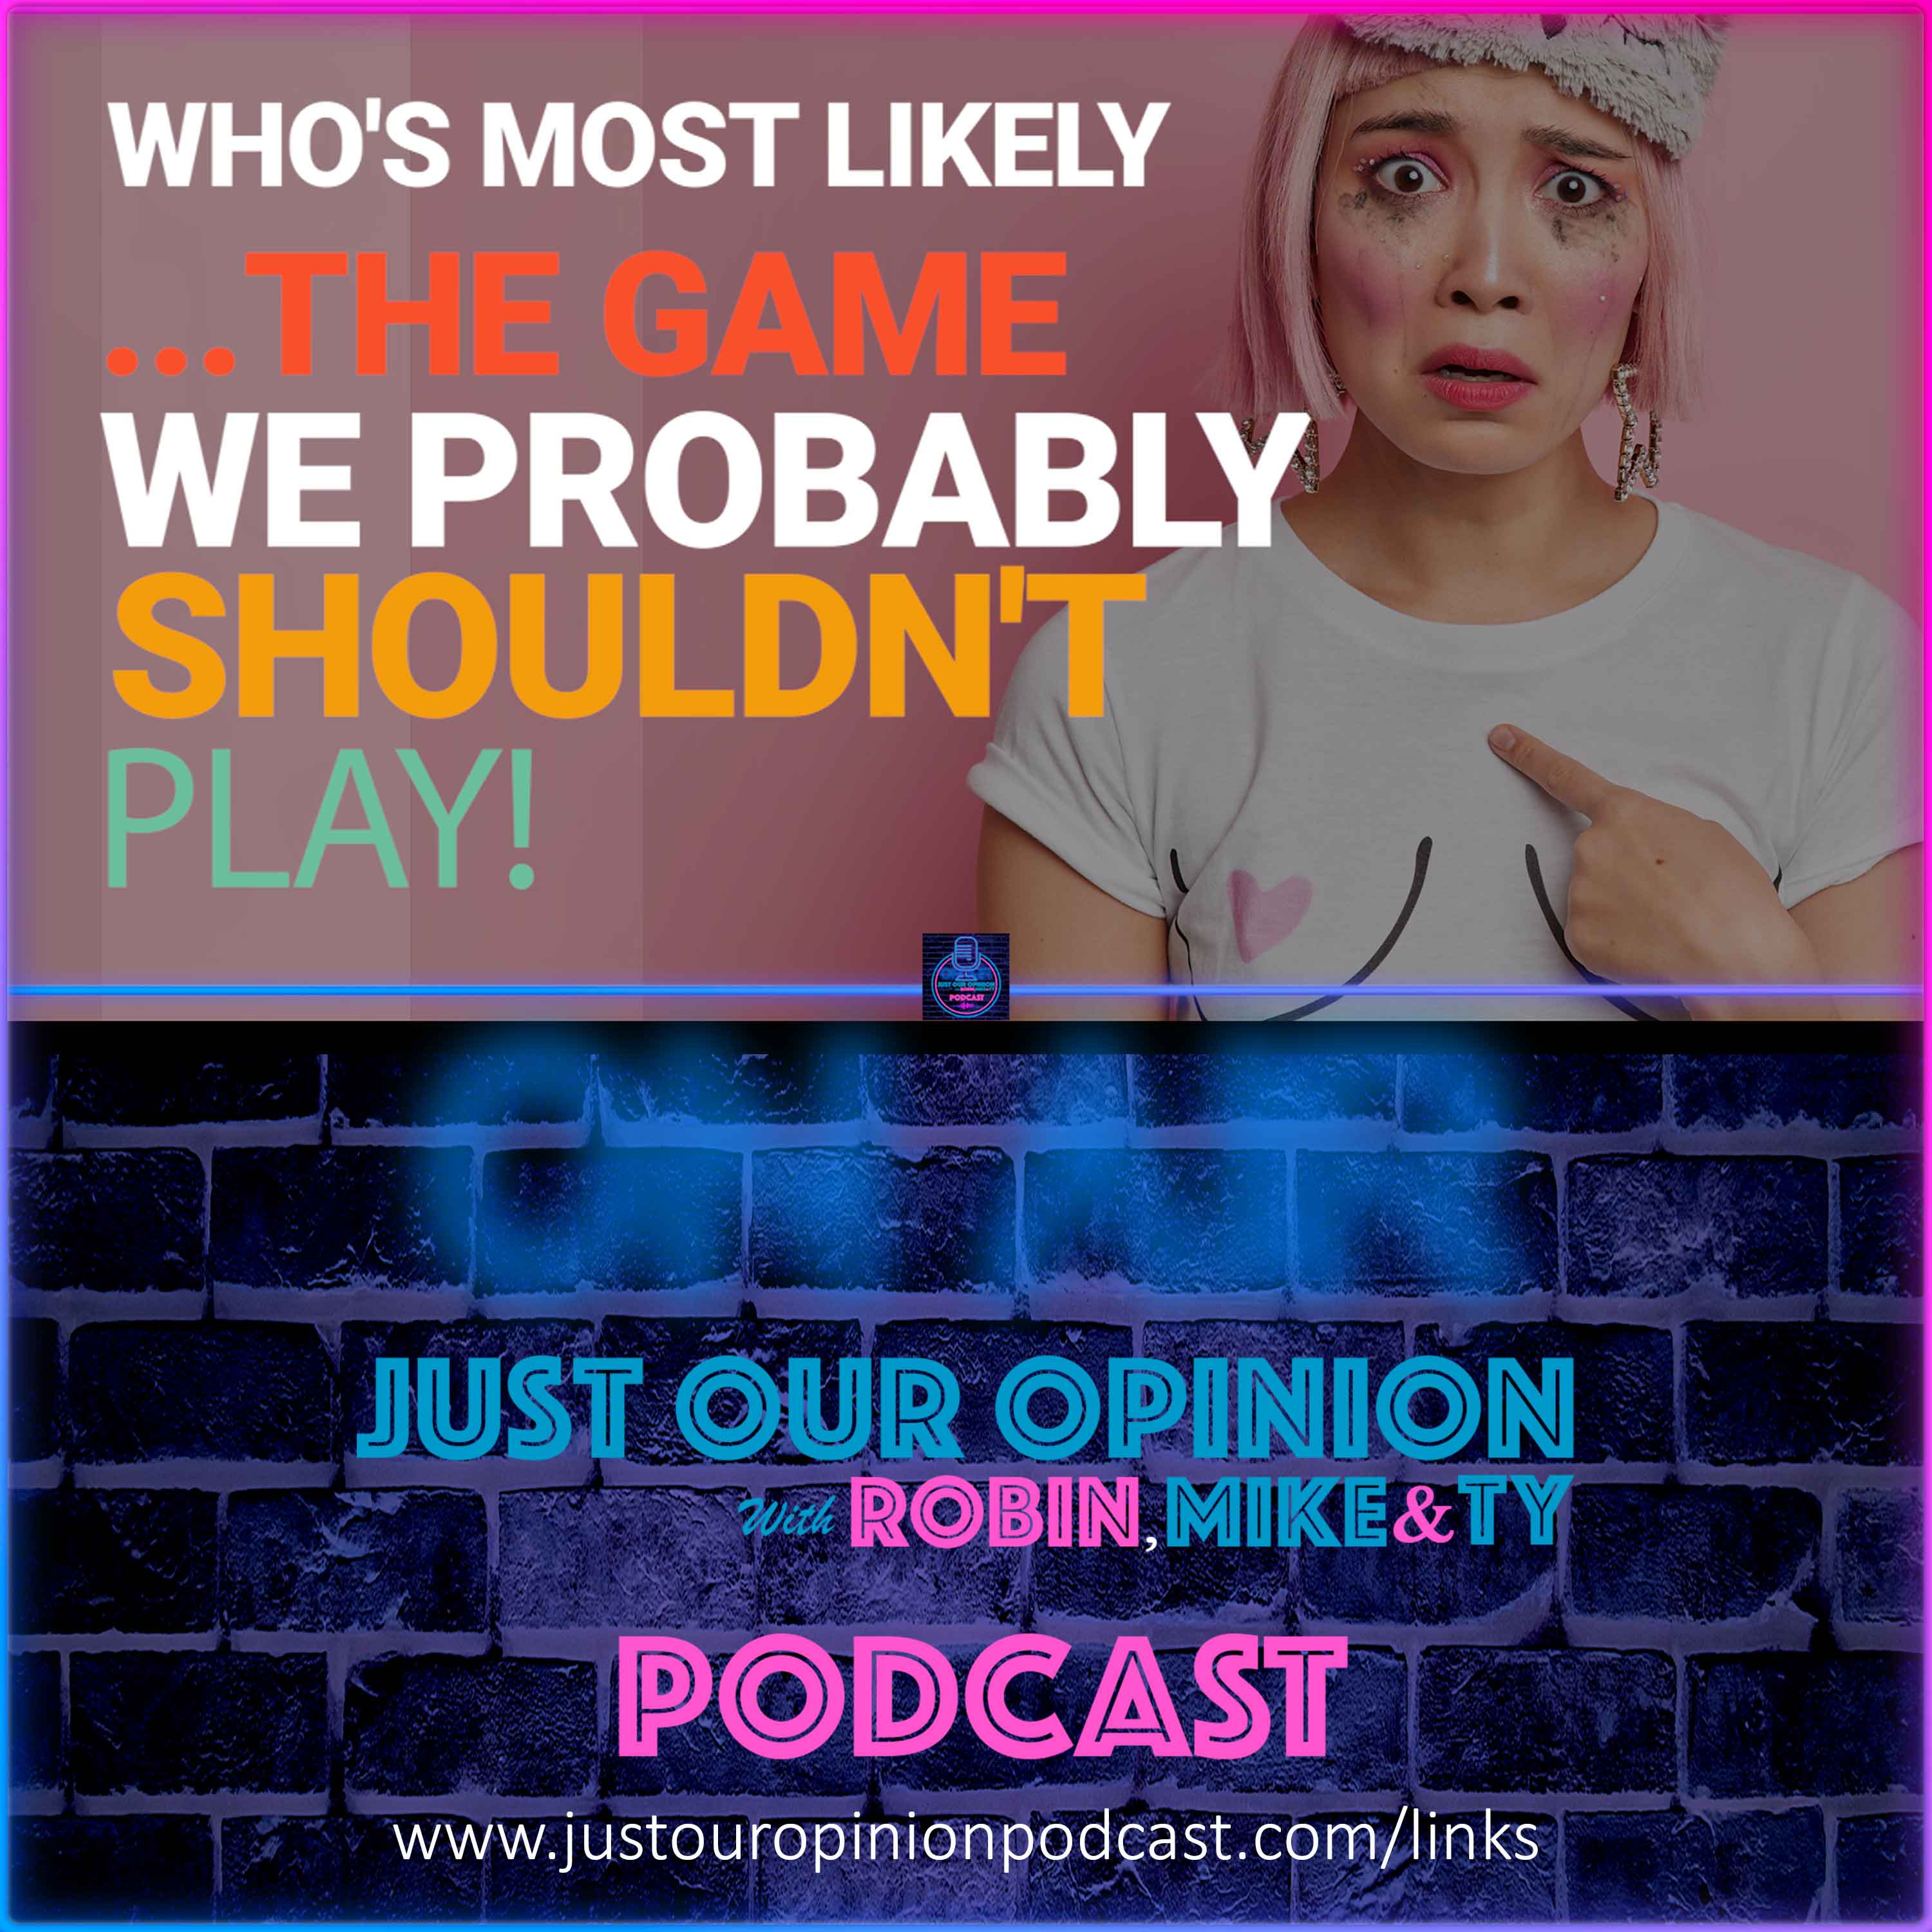 Artwork for podcast Just Our Opinion Podcast with Robin, Mike & TY